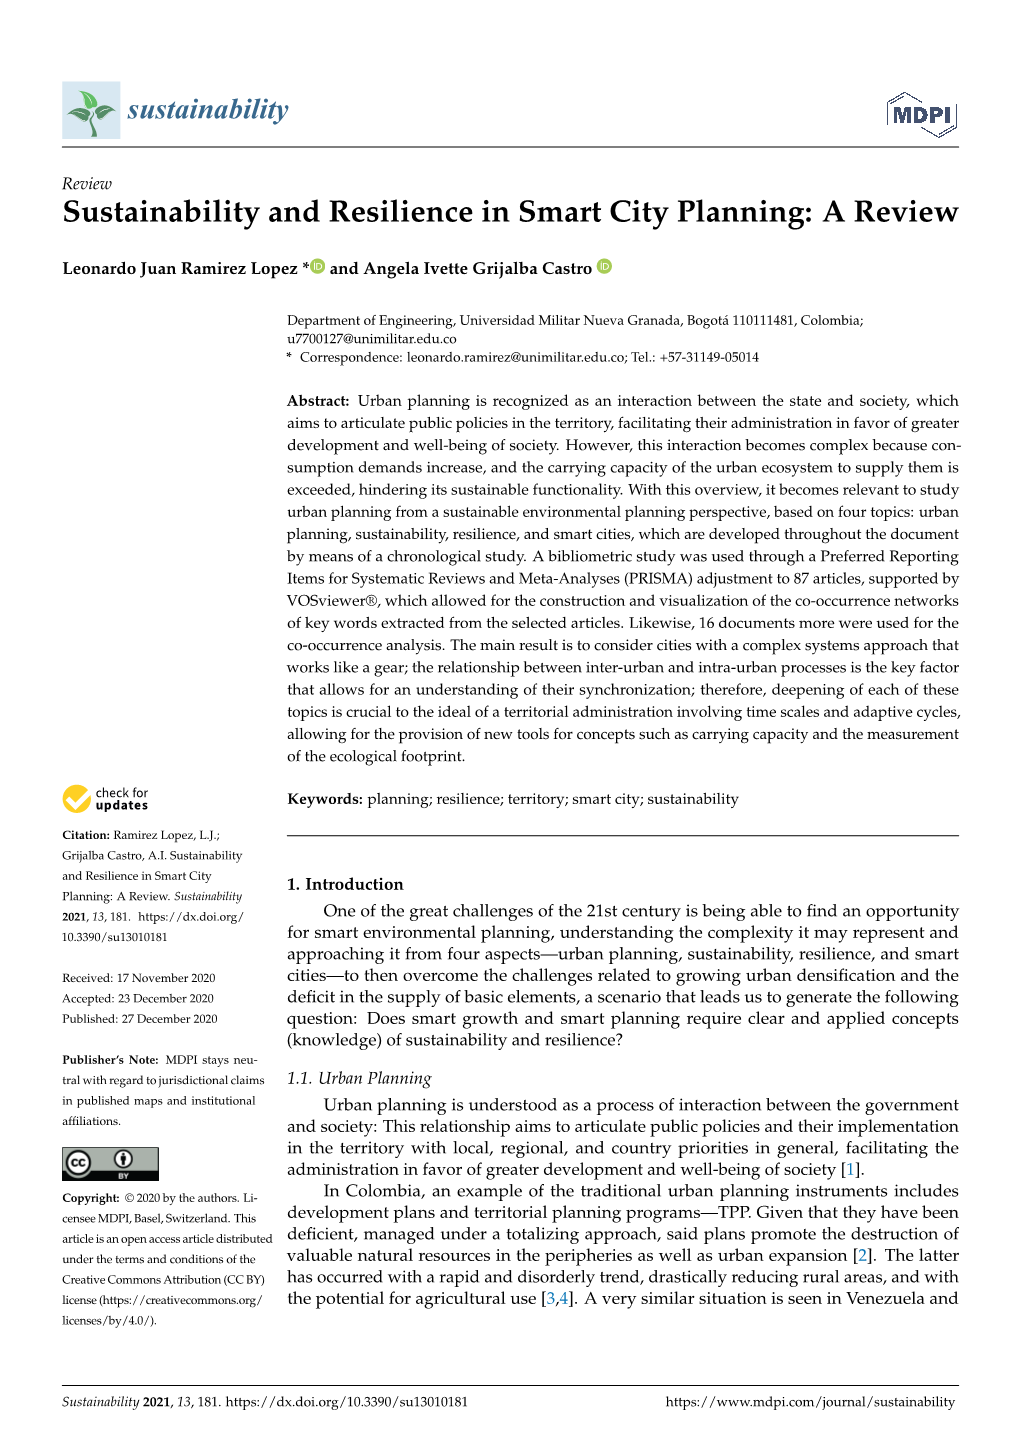 Sustainability and Resilience in Smart City Planning: a Review